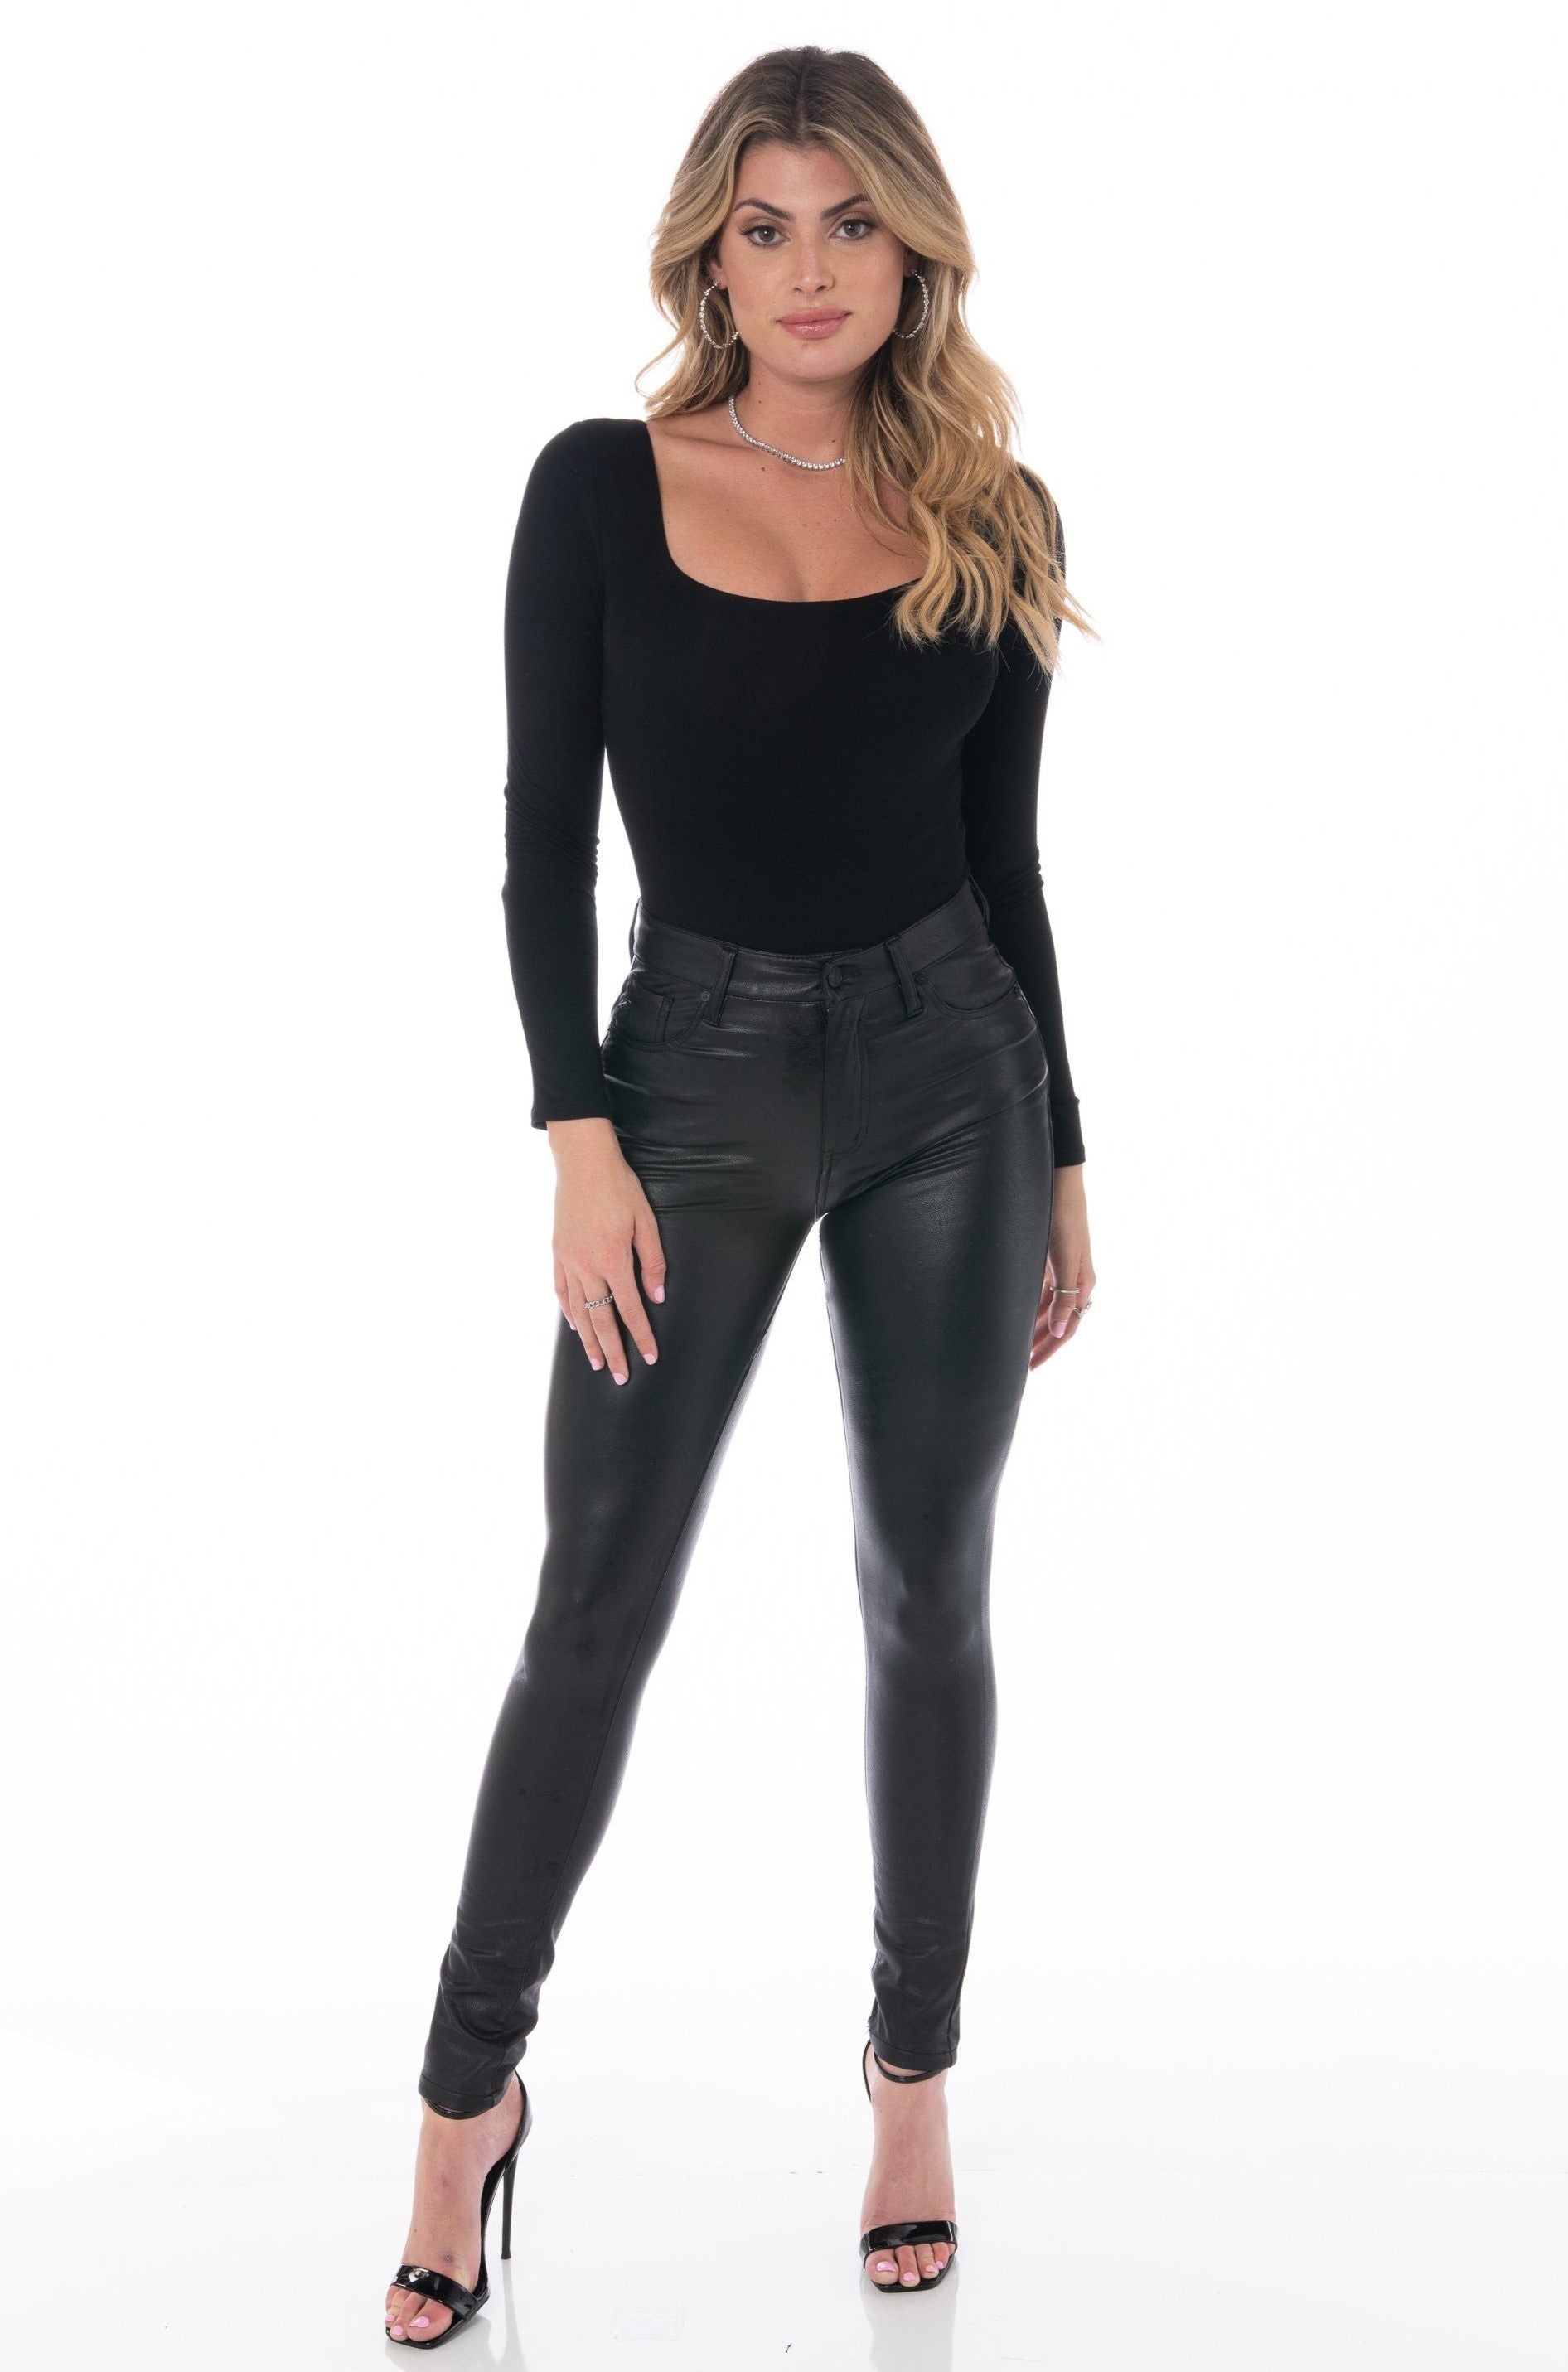 Black Leather Look High-Waisted Leggings exclusive at UrbanPeaches